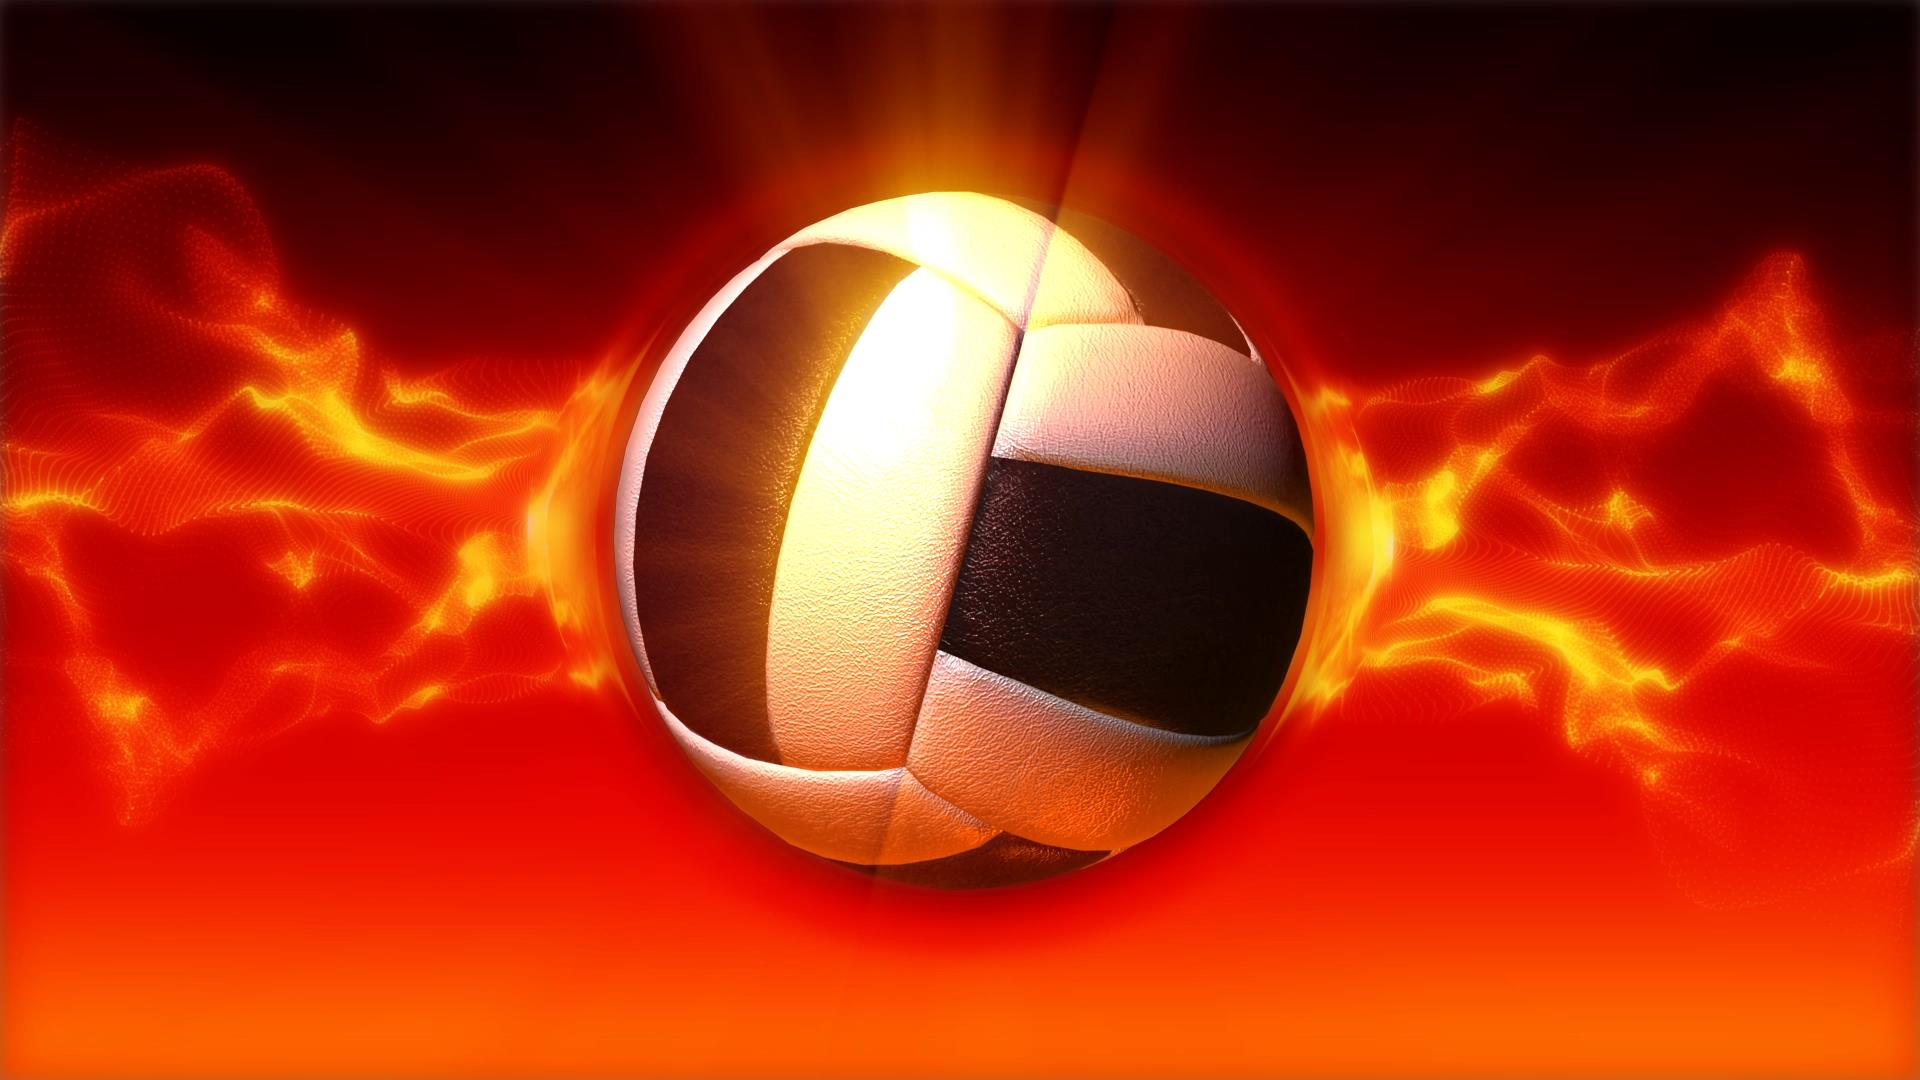 Volleyball Wallpaper On